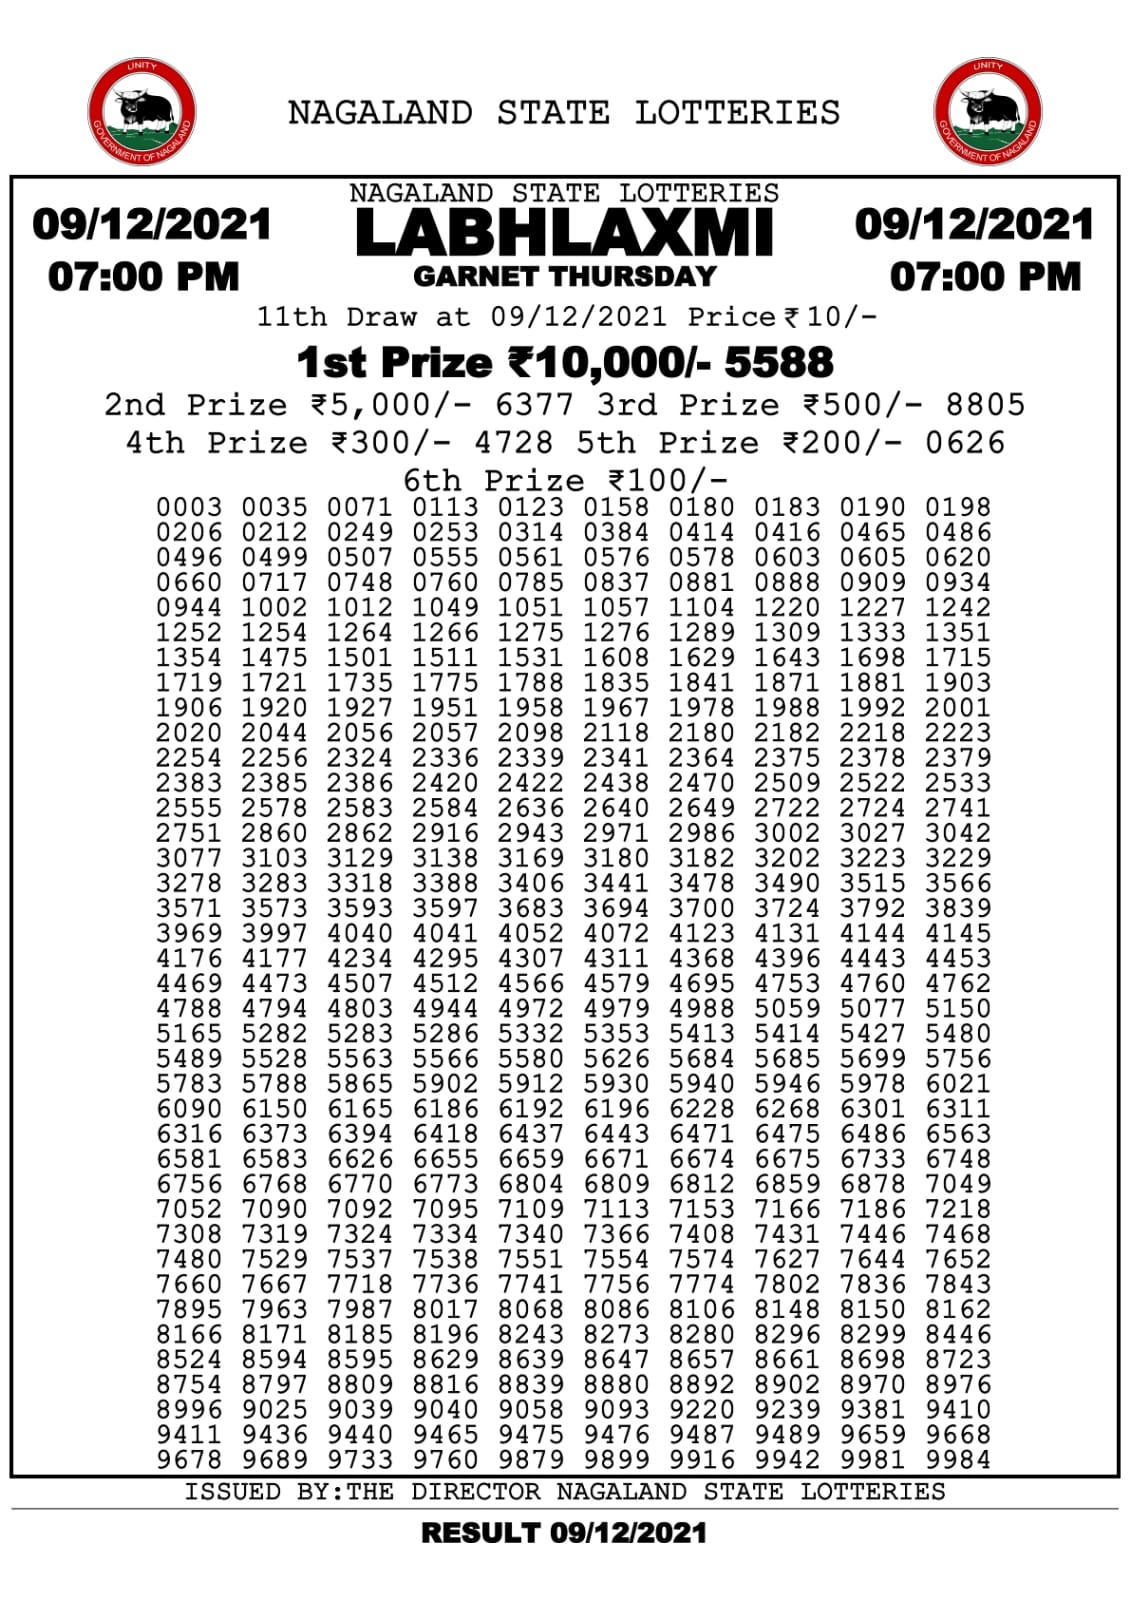 Labhlaxmi 7.00pm Lottery Result 09.12.2021